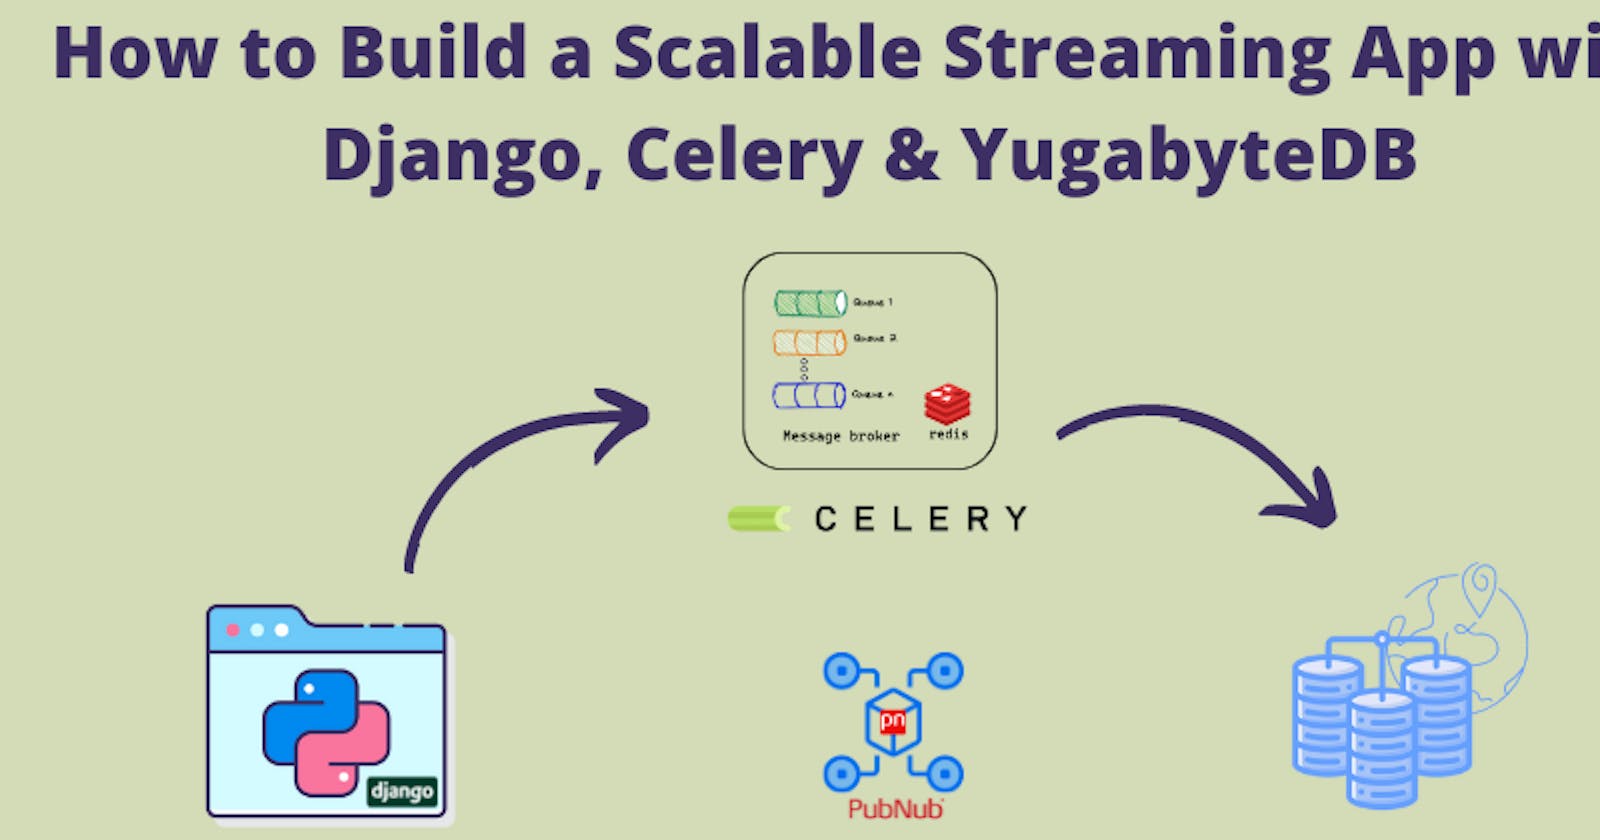 How to Build a Scalable Streaming App with Django, Celery & YugabyteDB